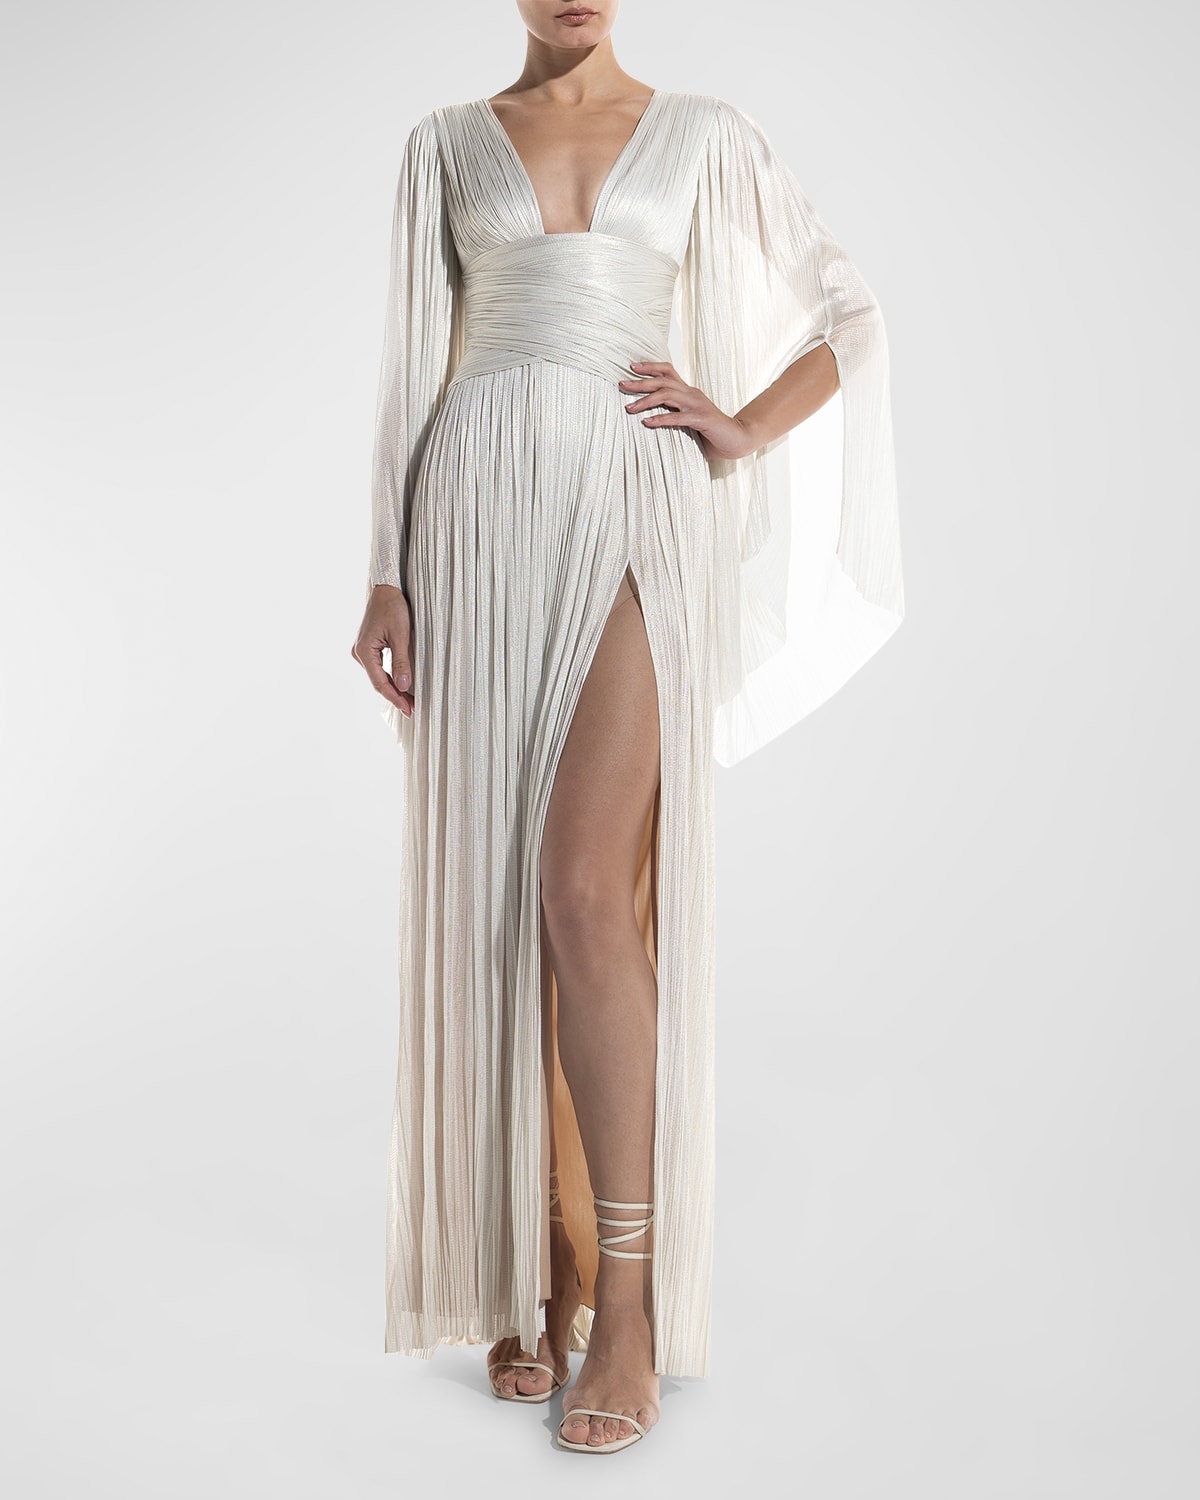 Maria Lucia Hohan Alana Metallic Plisse Thigh-slit Laced Gown In Light Gold